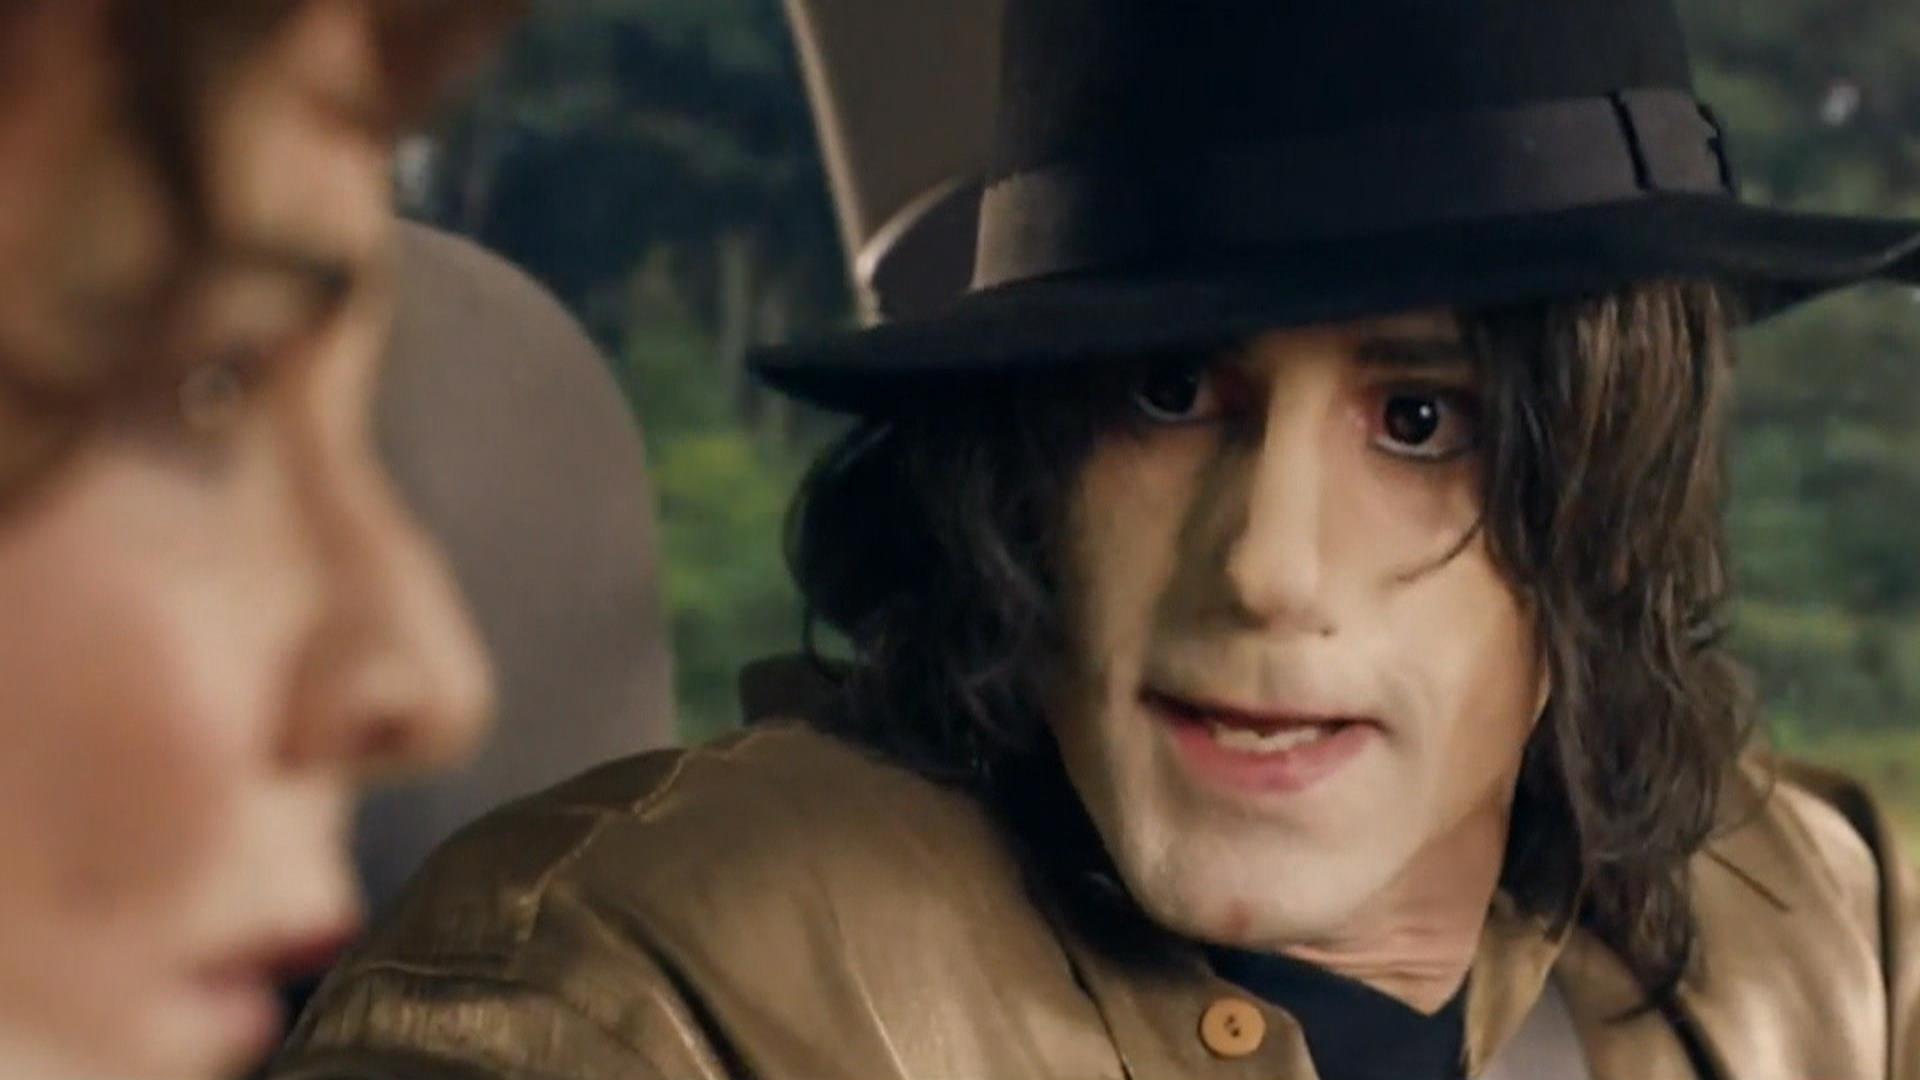 See Joseph Fiennes' weird portrayal of Michael Jackson in British comedy